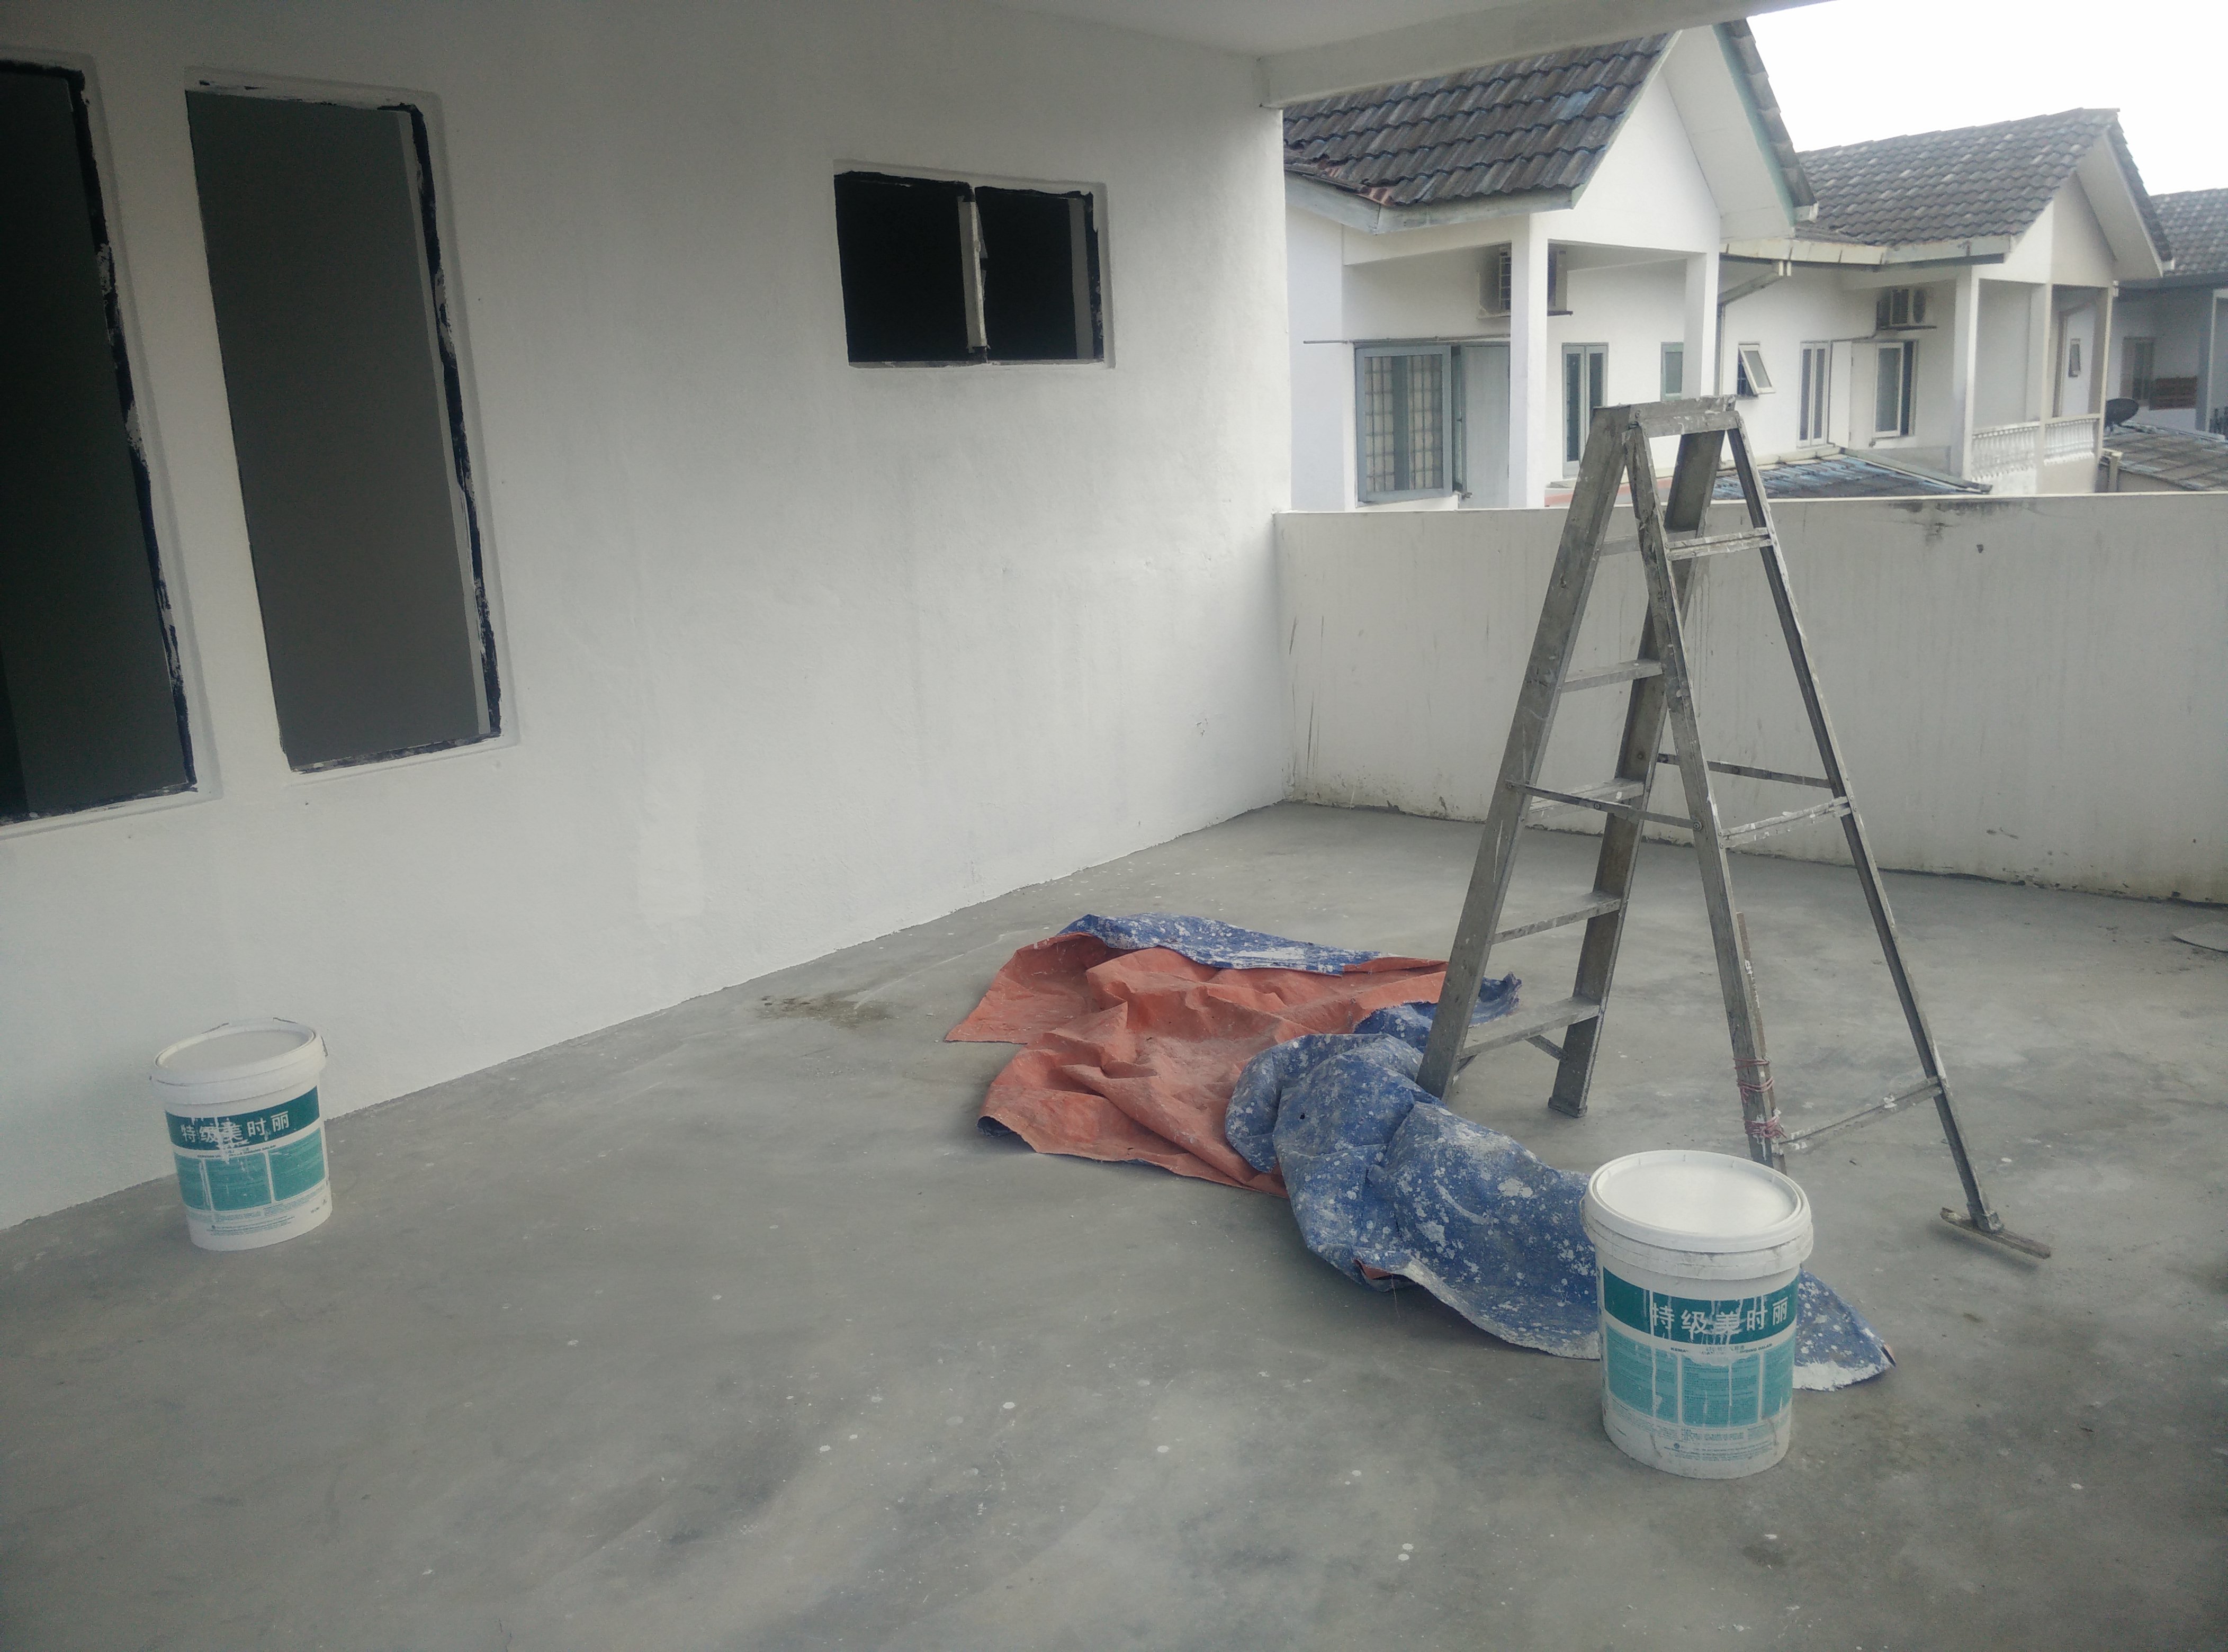 Renovation_of_a_two-storey_terraced_house_in_Selangor%2C_Malaysia_20191006_163249.jpg